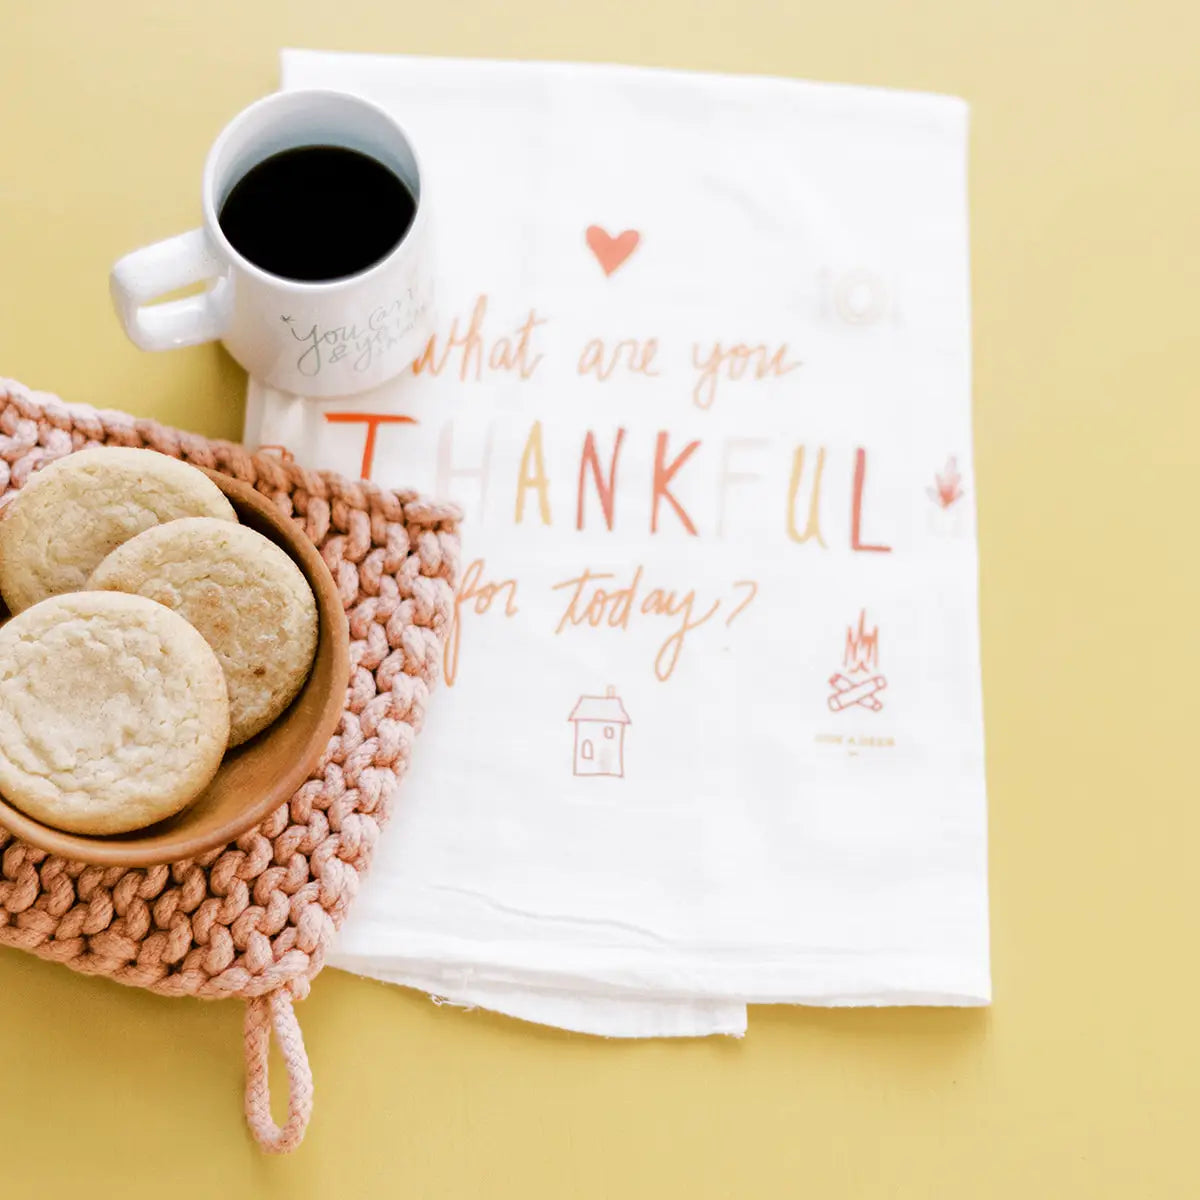 What Are You Thankful For - Flour Sack Towel